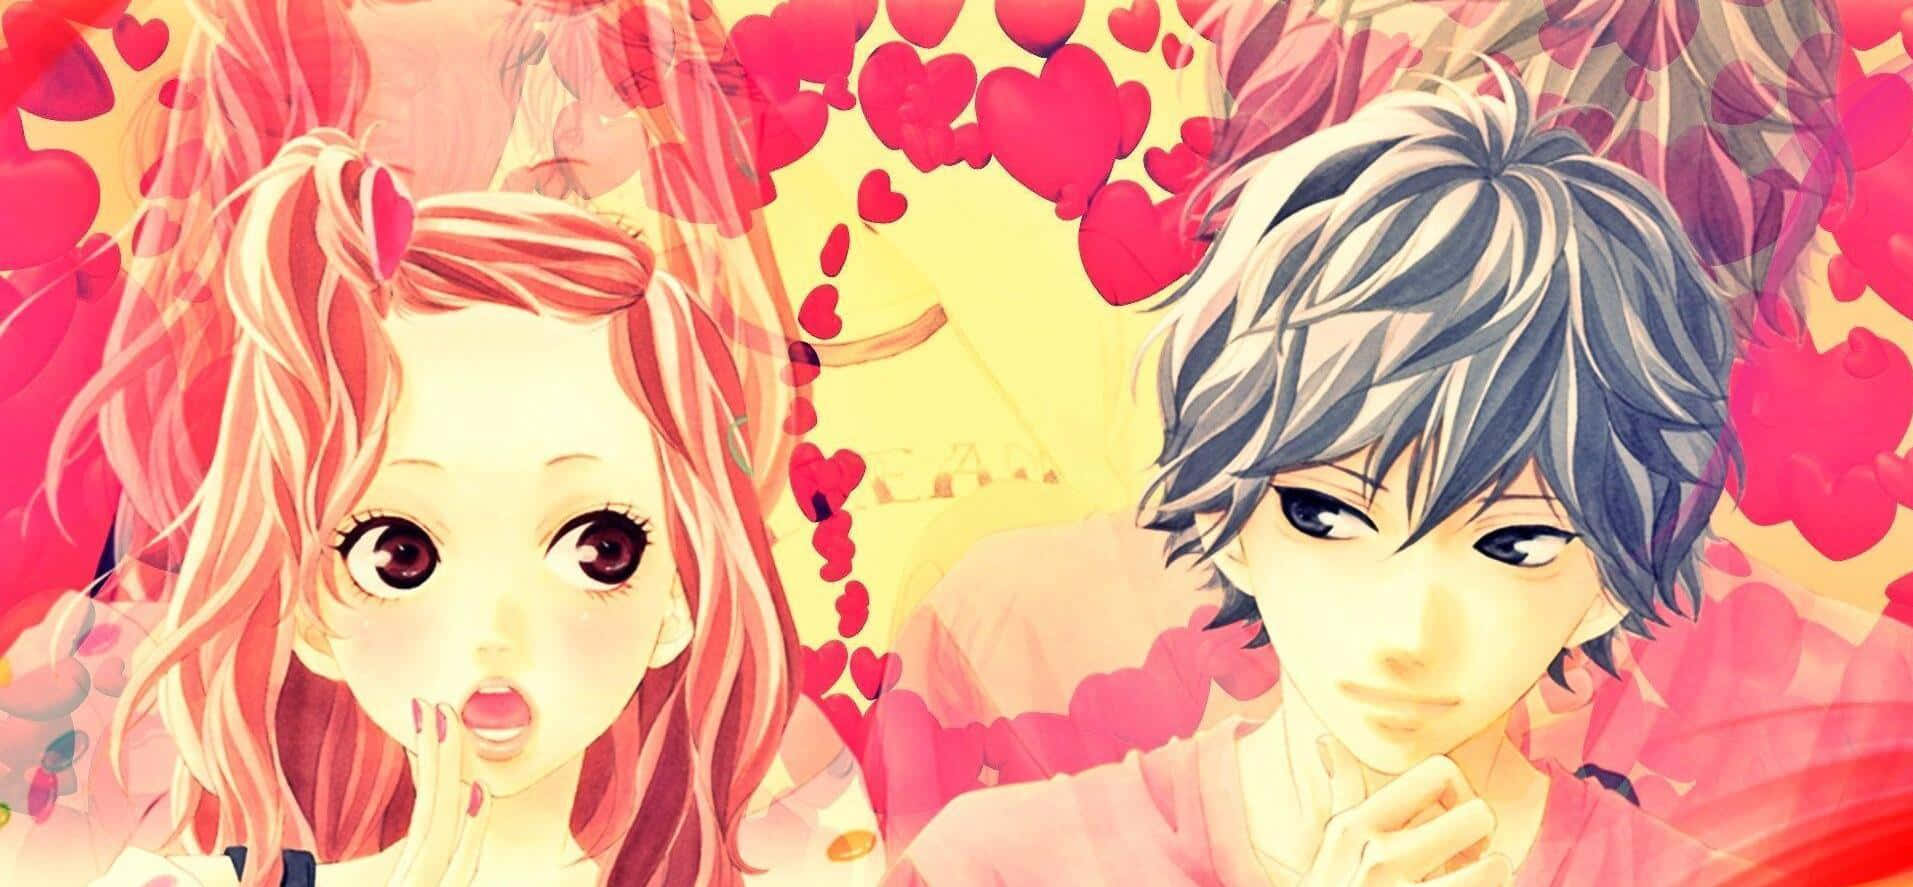 The 35 Best Blue Spring Ride Quotes Ranked